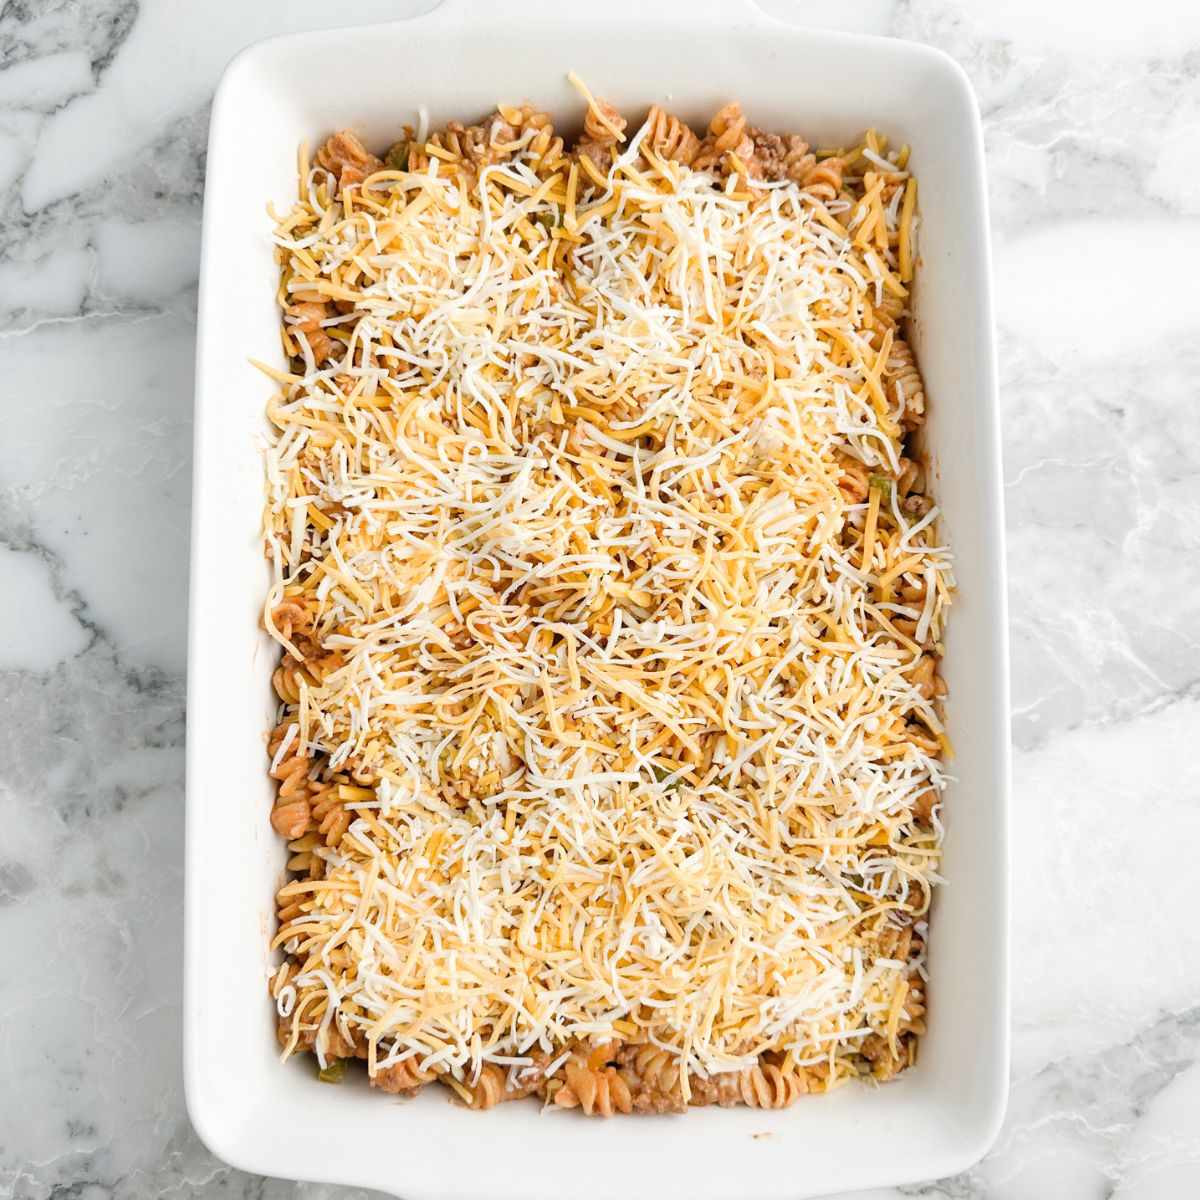 Casserole dish with pasta mixture topped with shredded cheese.